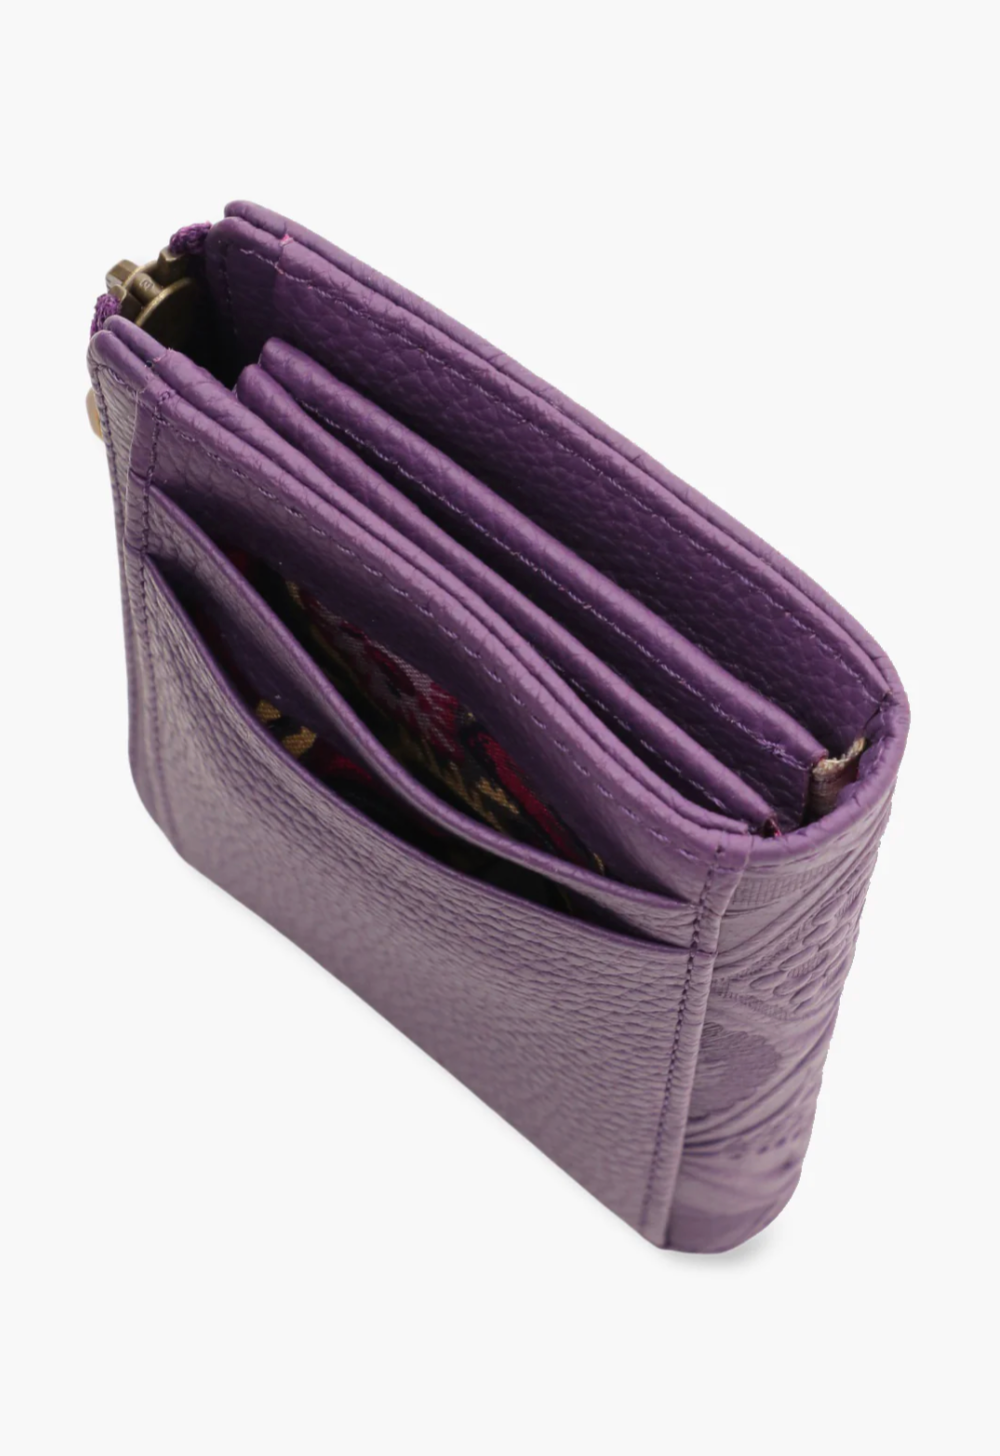 Nova Small Wallet purple, 5 card slots and 3 open compartments, detail of the flap 